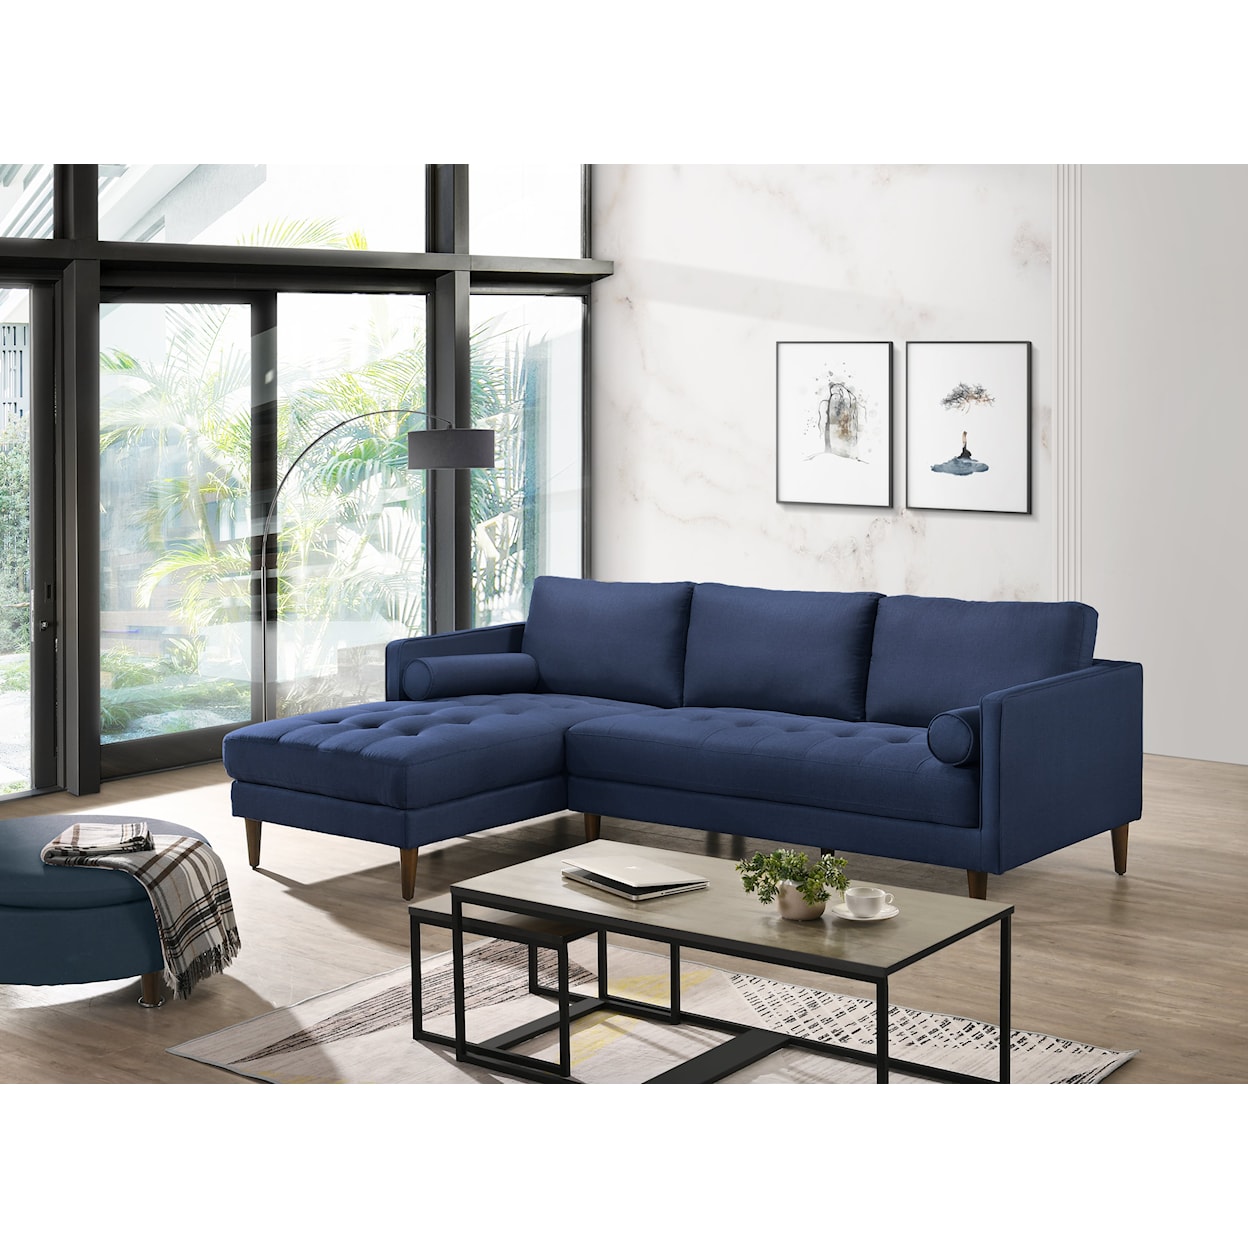 Elements International Apollo 2 Piece Chaise Sectional